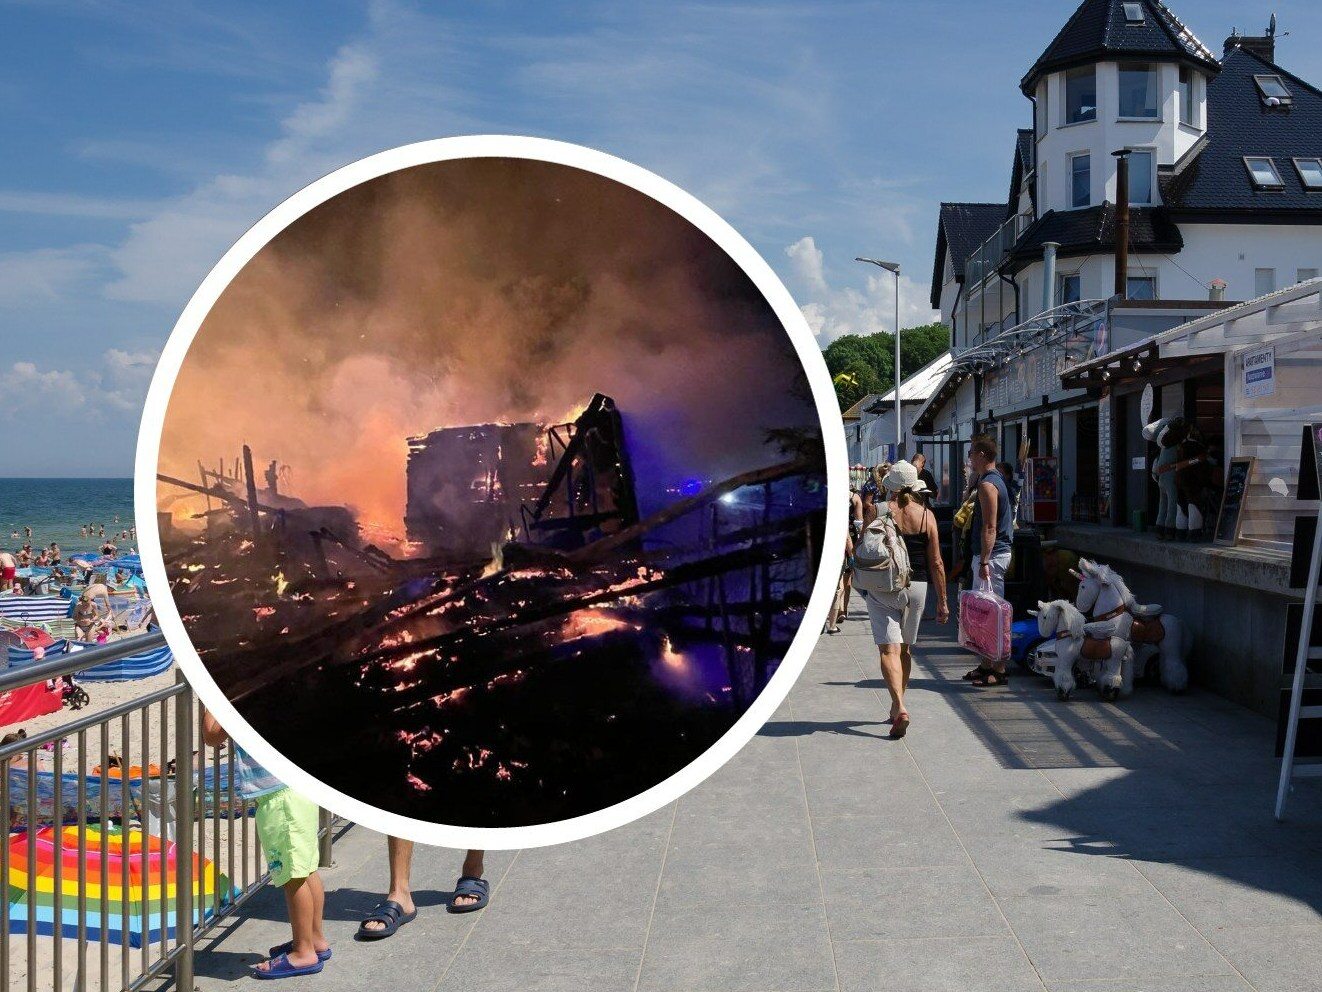 Fire at the Polish seaside.  As many as 12 tourist cottages burned down